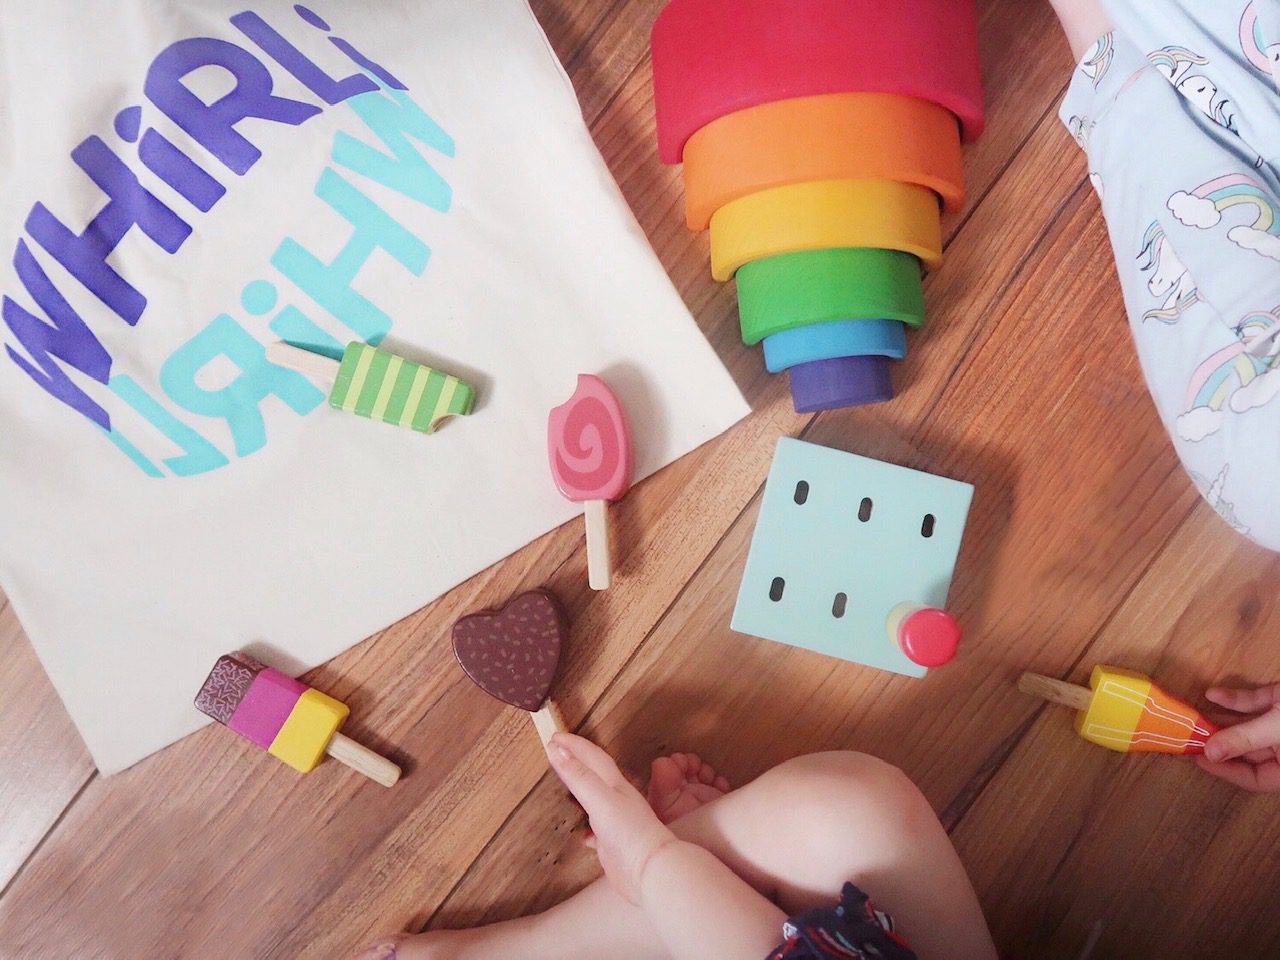 Whirli Toy Subscription Box for Sustainable Toys